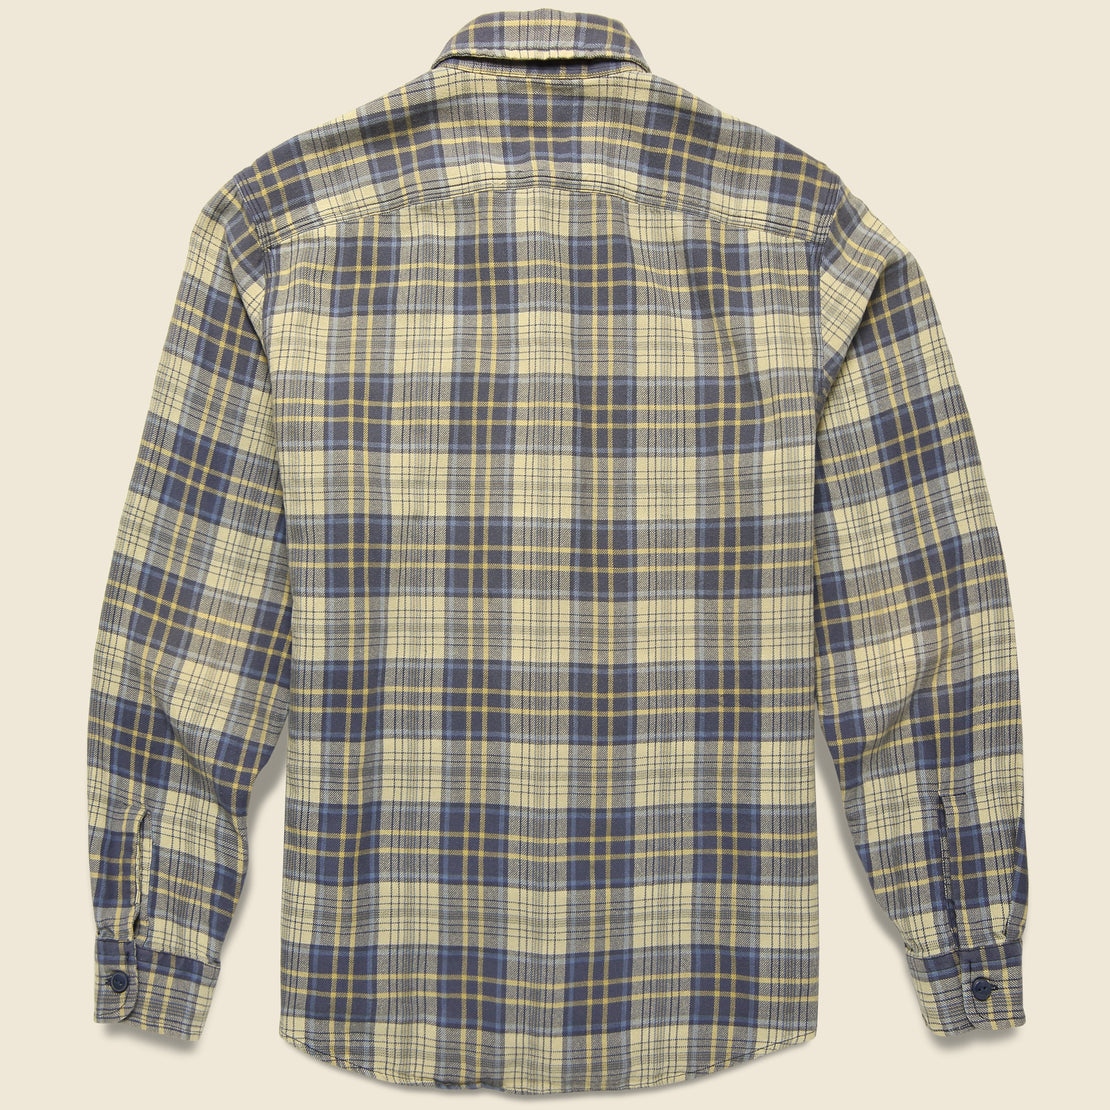 Matlock Workshirt - Faded Blue/Yellow - RRL - STAG Provisions - Tops - L/S Woven - Plaid